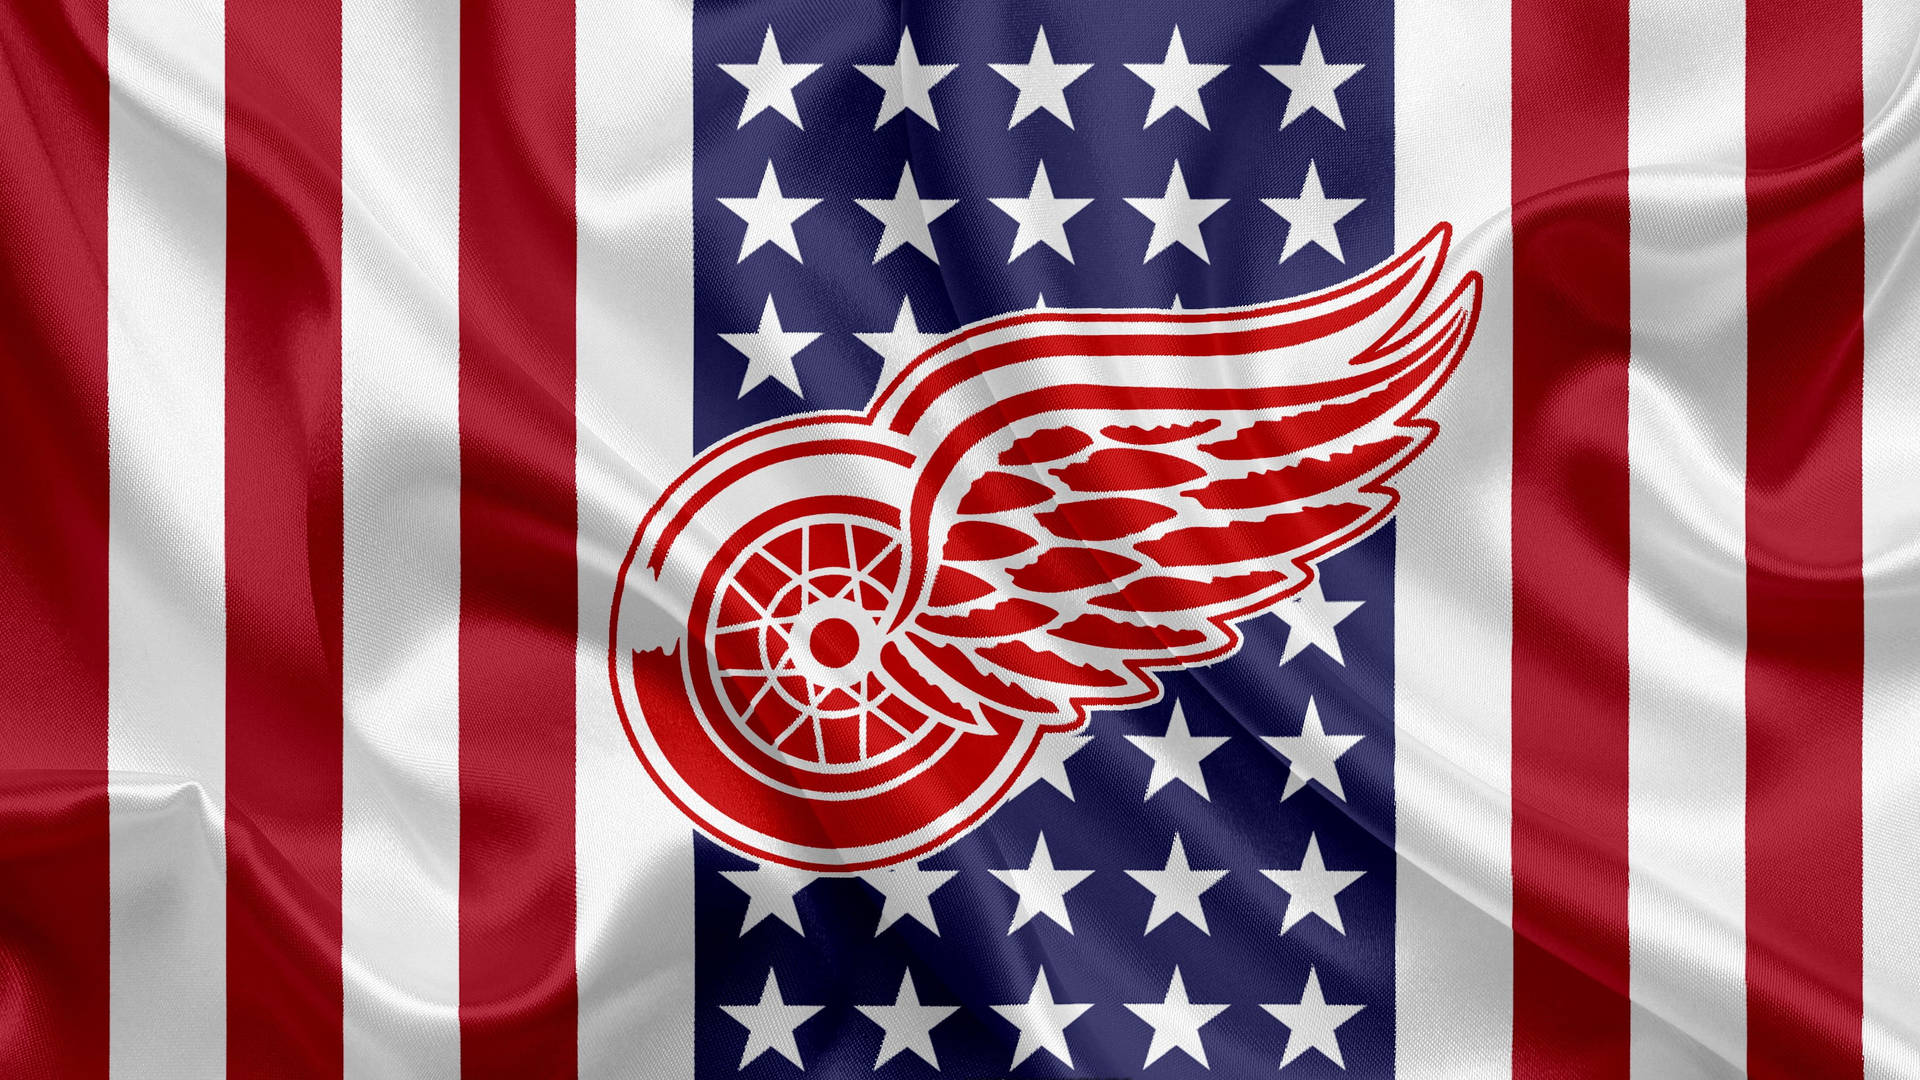 Detroit Red Wings And American Flag Wallpaper